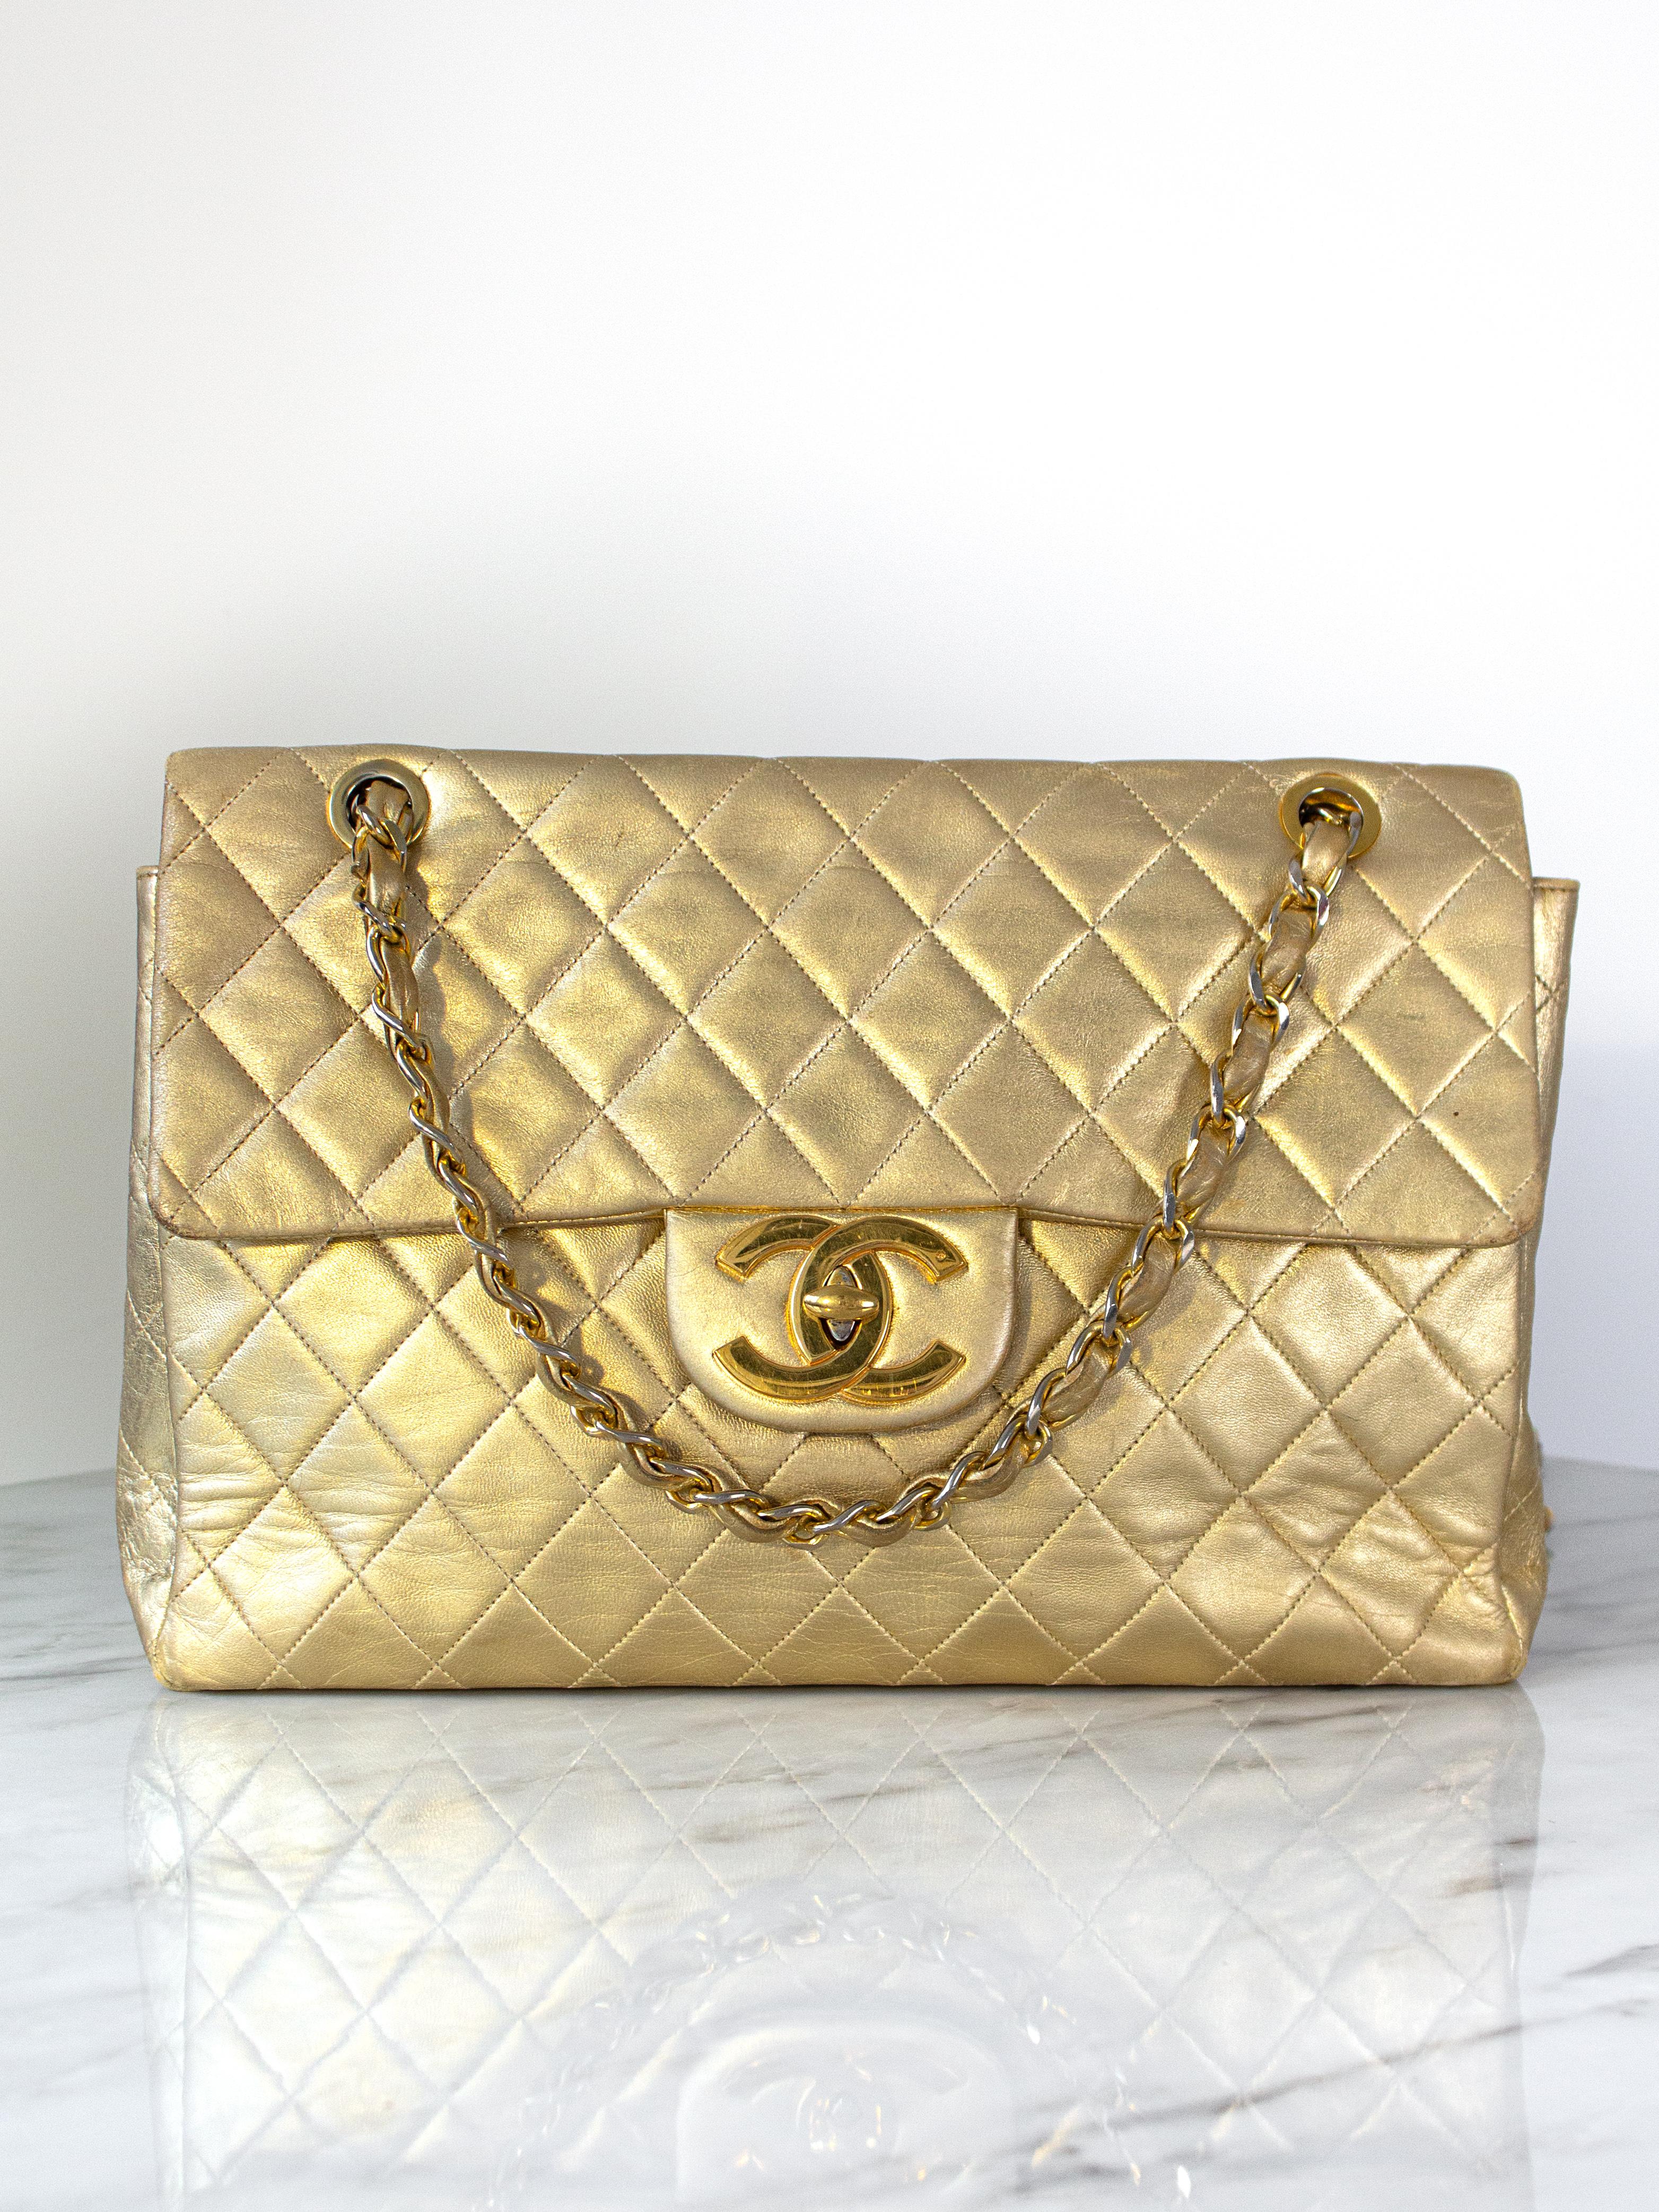 Chanel Jumbo XL Maxi bag in a stunning metallic gold shade, a rare find originating from the 1990s. Crafted from luxurious quilted lambskin leather in a radiant gold tone, this piece is adorned with exquisite gold-plated hardware. Secured by a